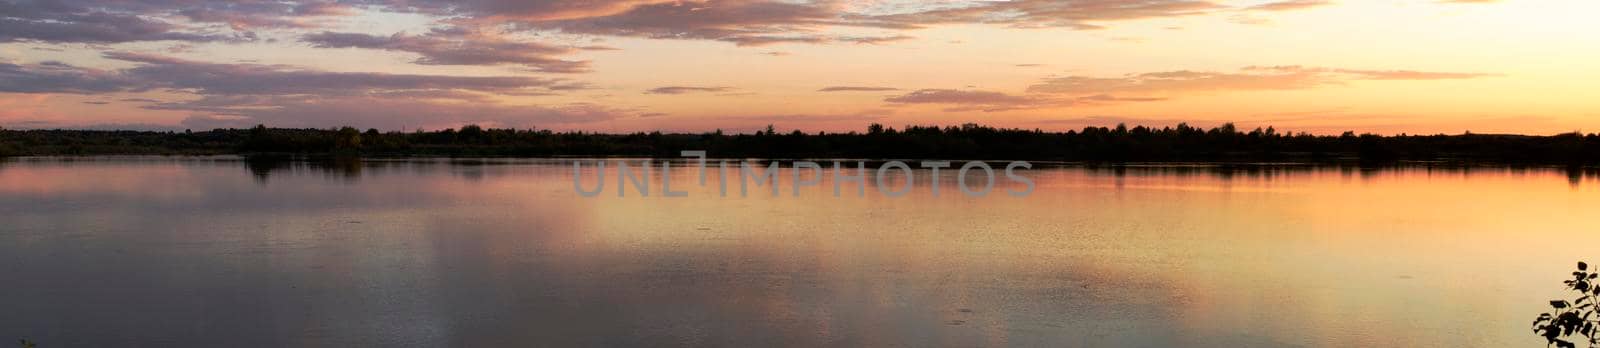 A colorful sunny sunset is reflected on the surface of the calm lake. by AnatoliiFoto